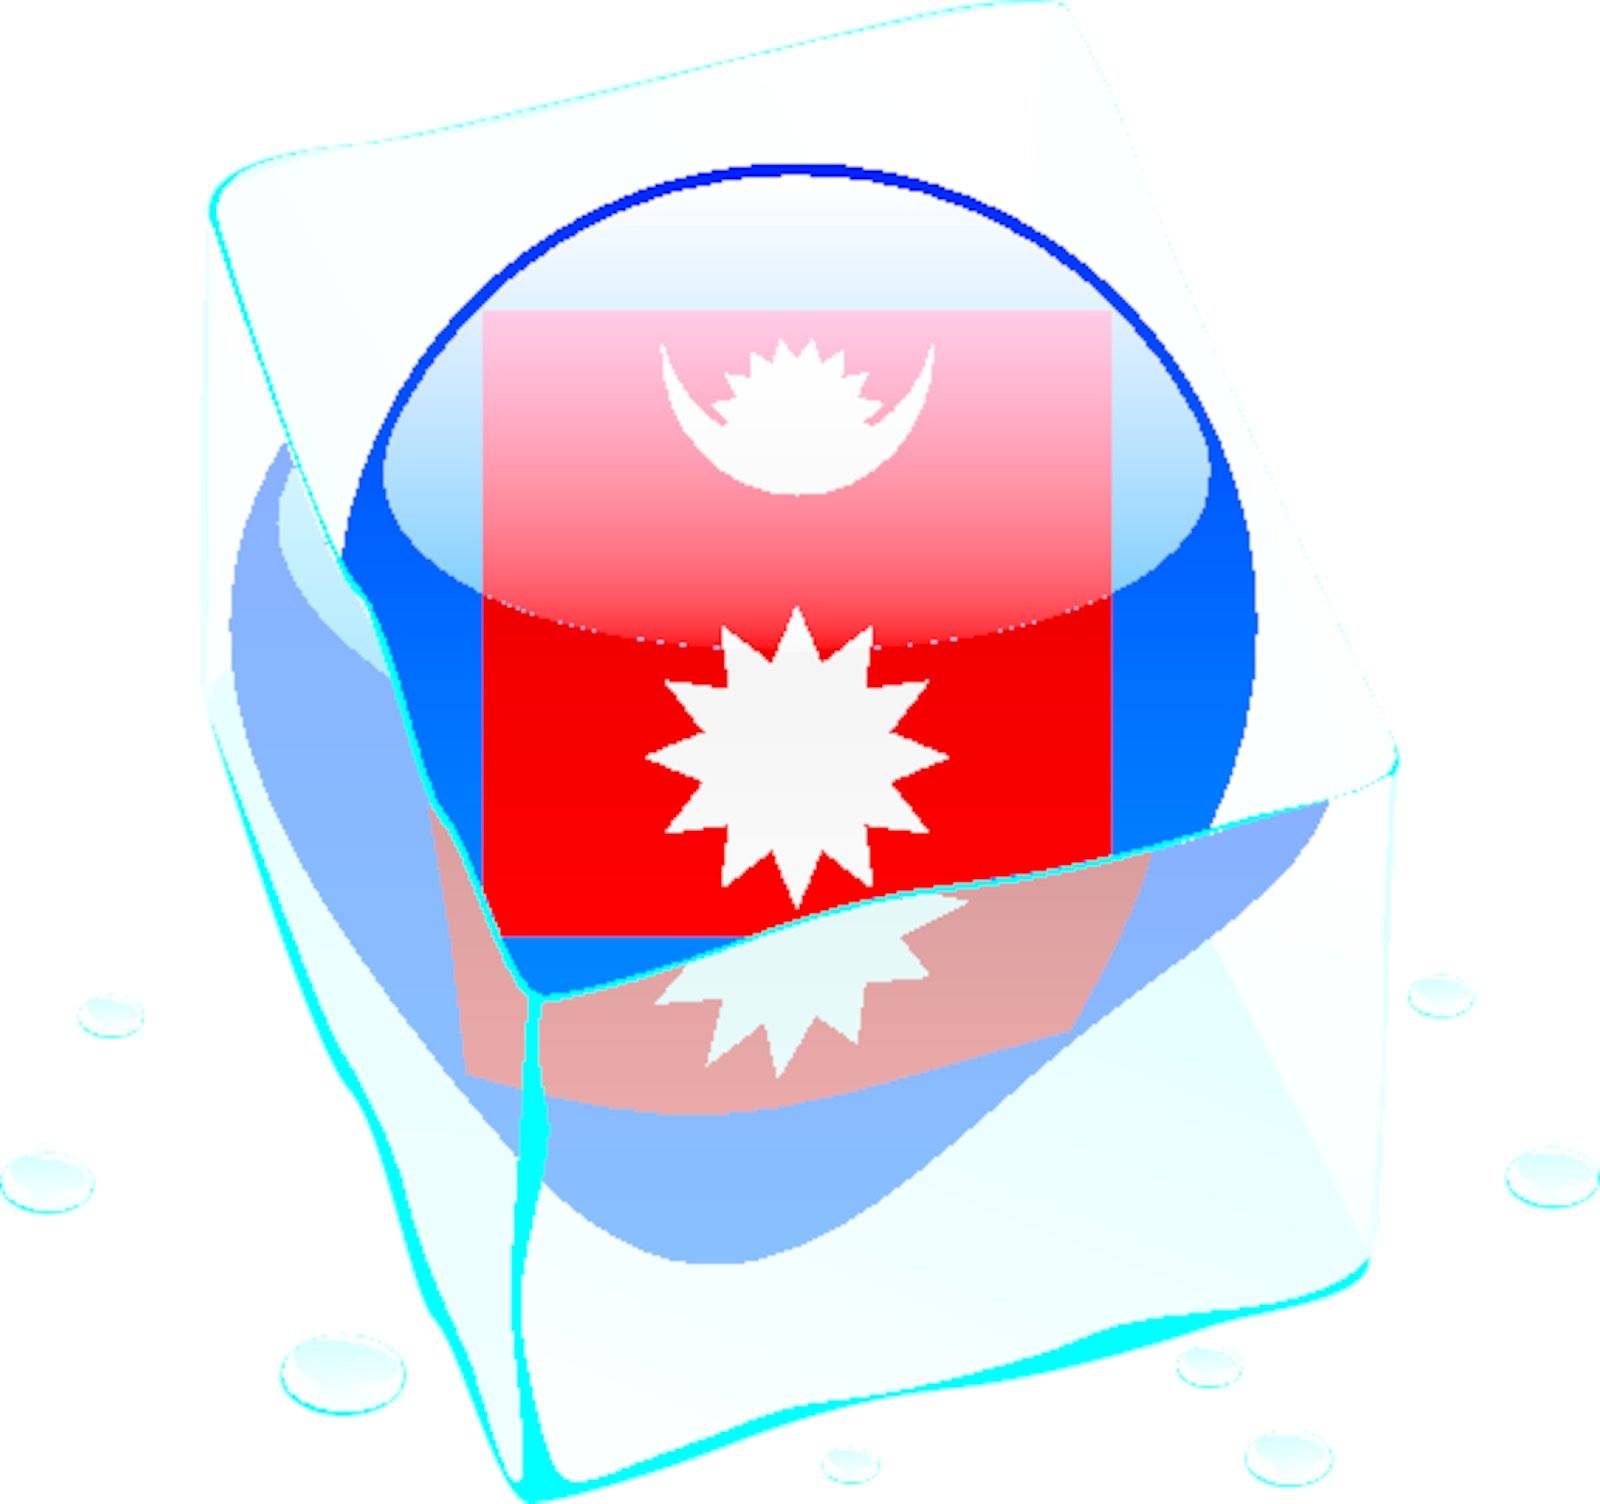 fully editable vector illustration of nepal button flag frozen in ice cube